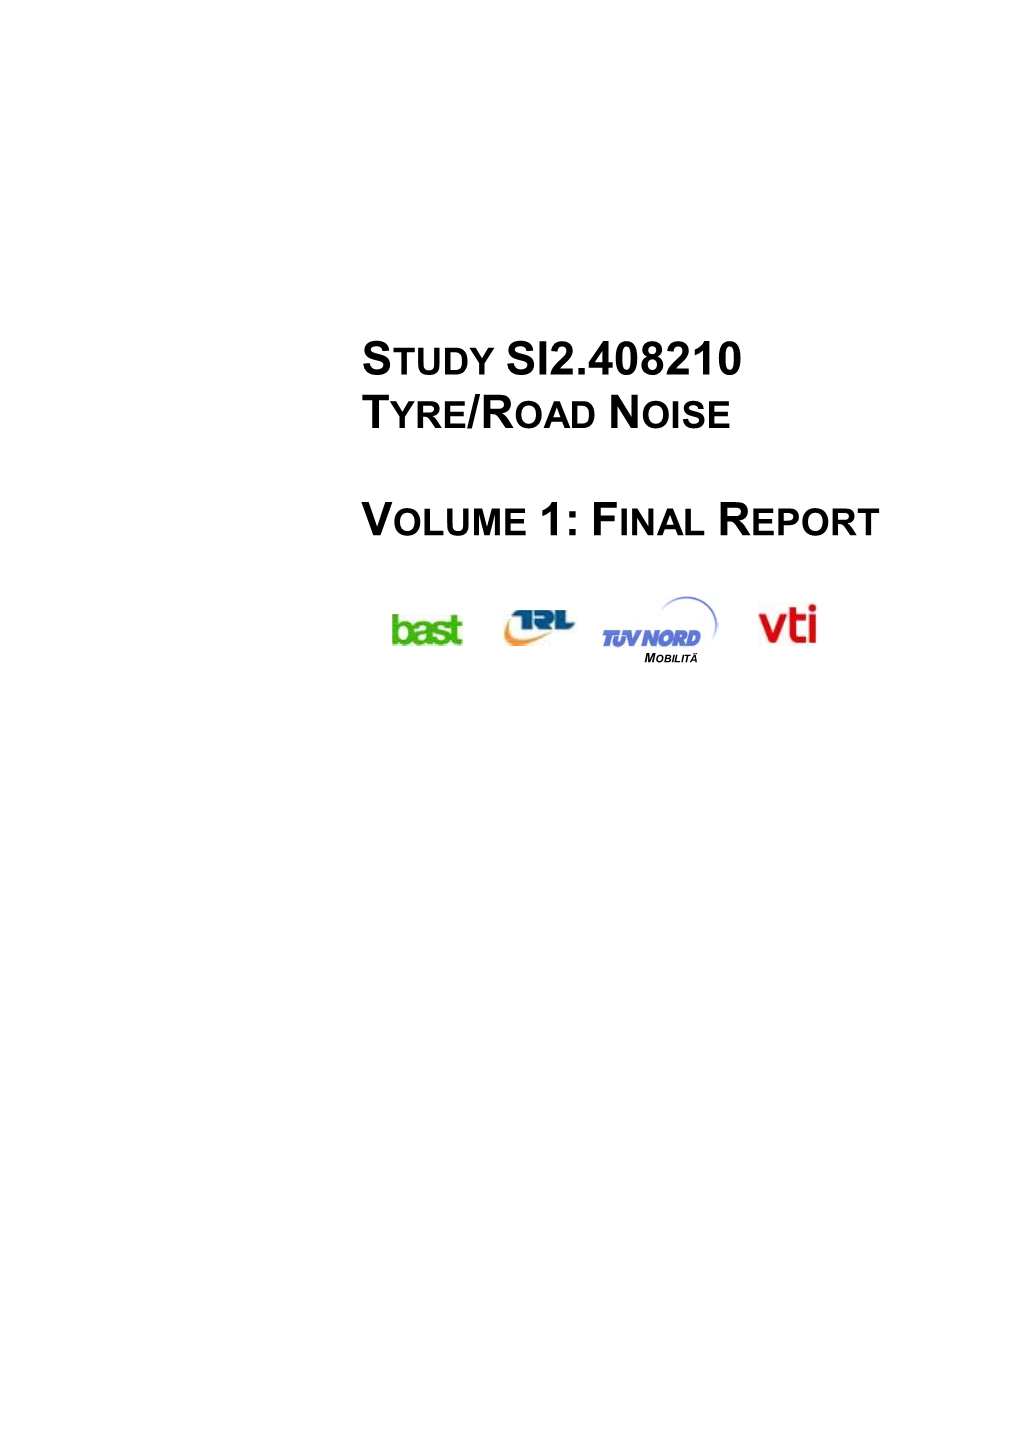 Study Si2.408210 Tyre/Road Noise Volume 1: Final Report